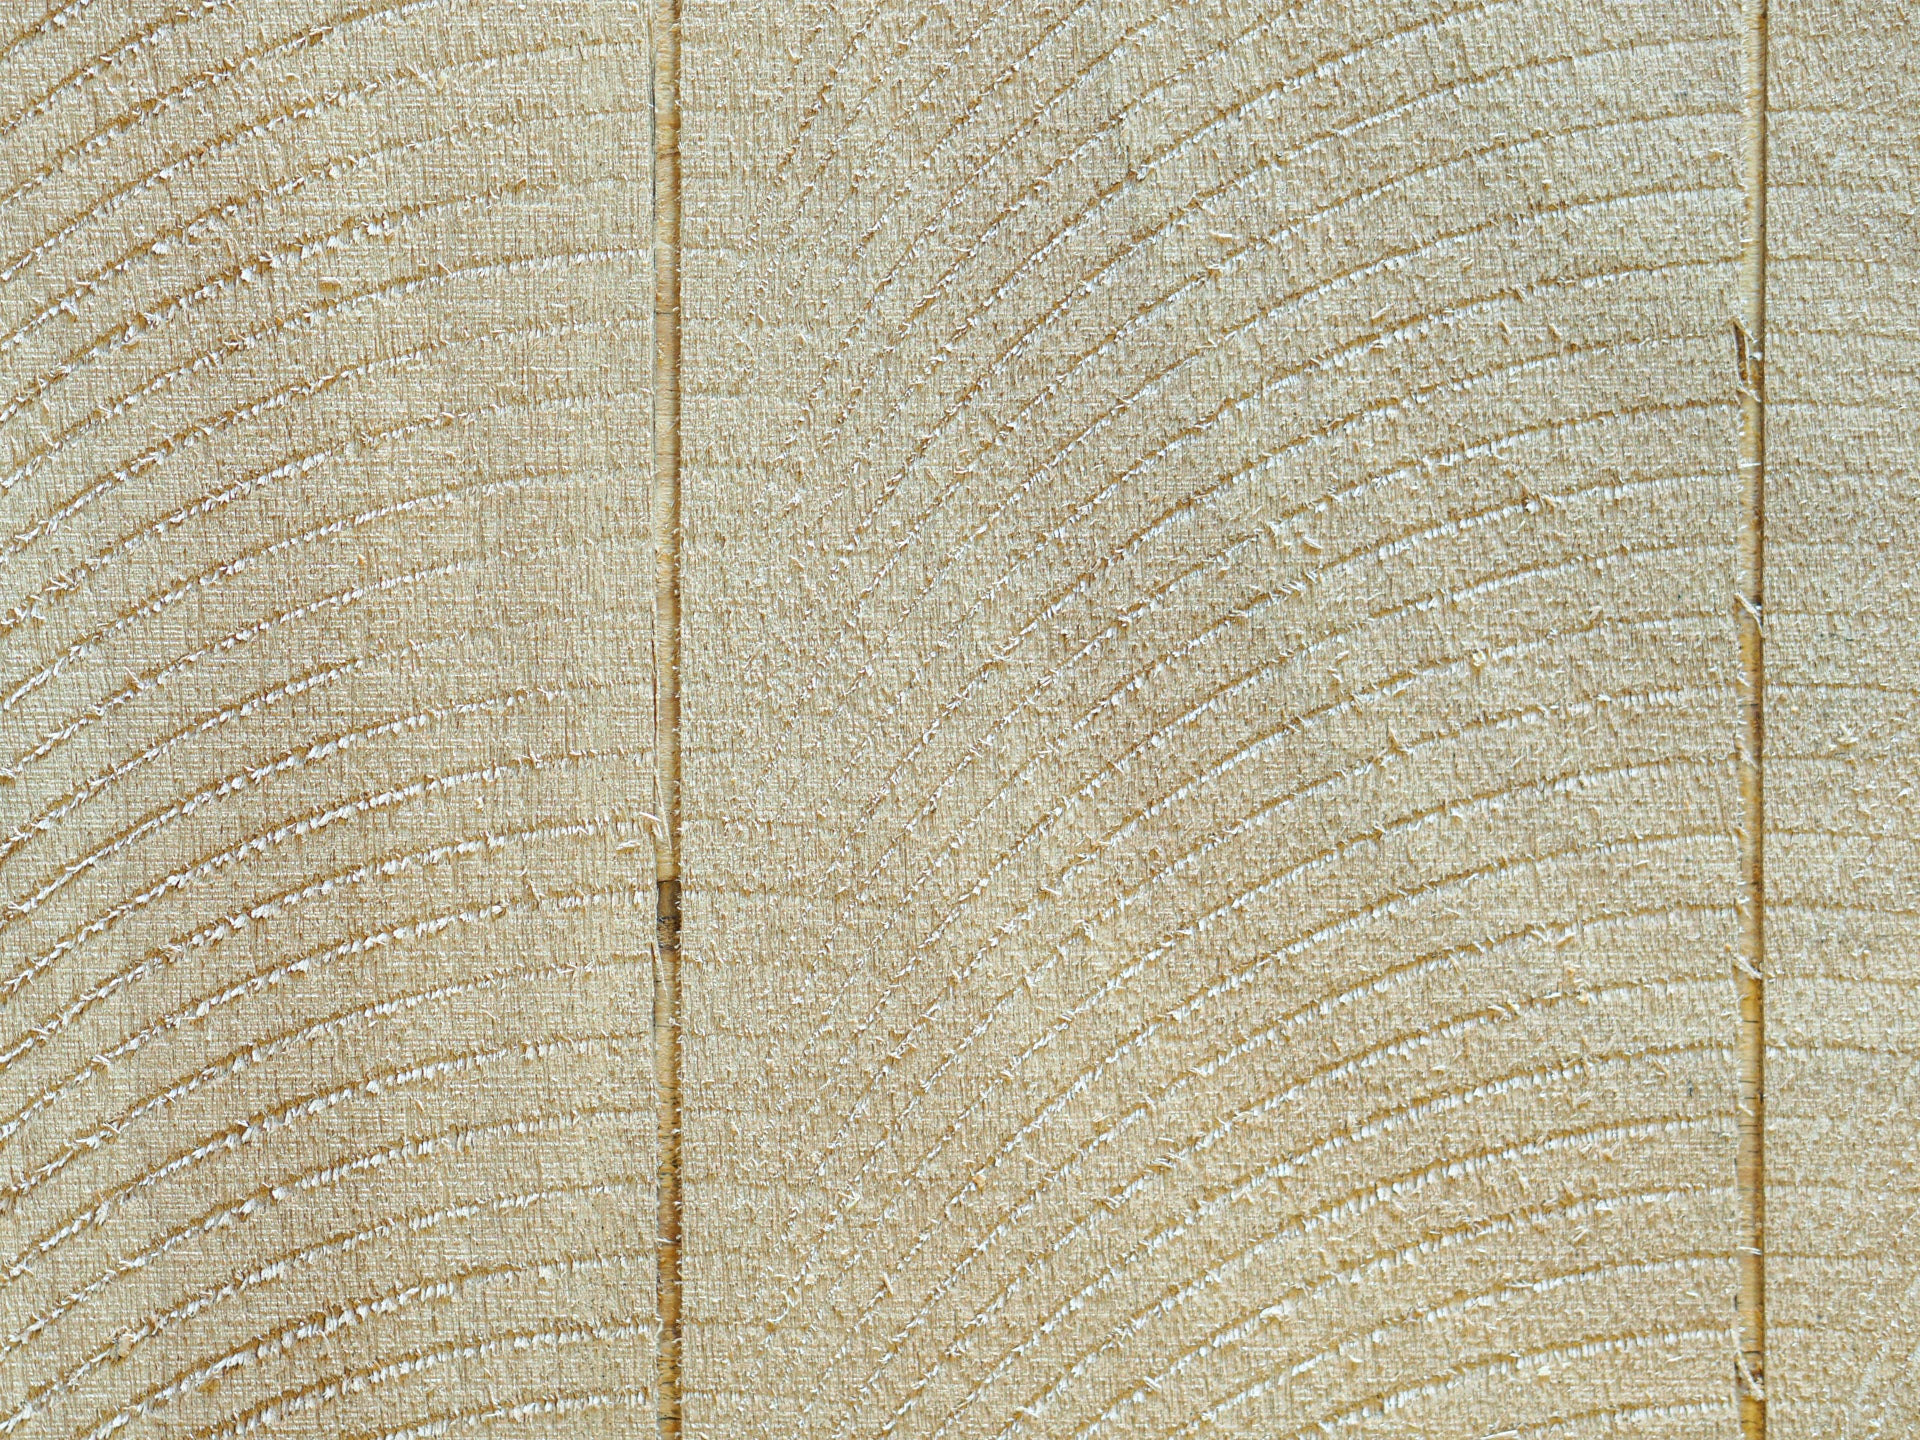 Close up of Vintage Plywood Millworks' Planktex pattern showing the grooves and saw swirl marks